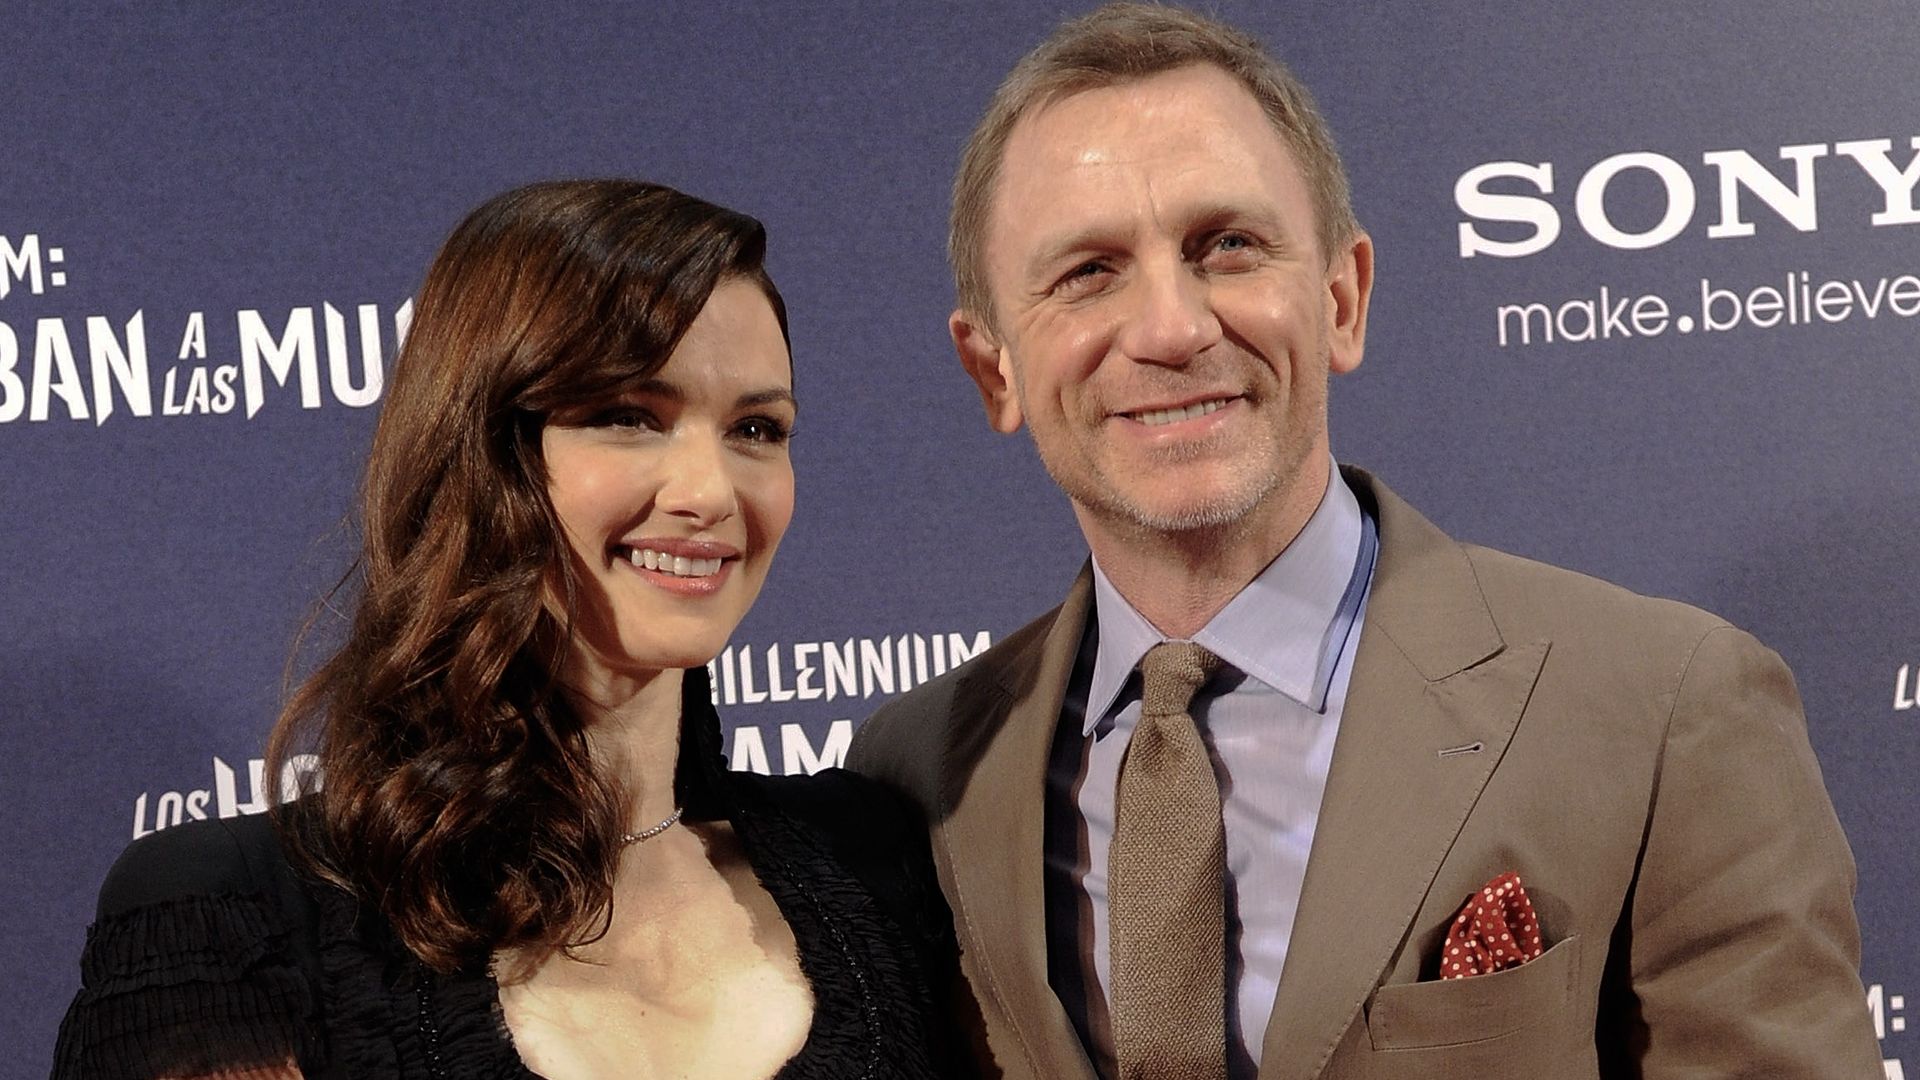 Rachel Weisz and Daniel Craig at the premiere of Millenium: The Girl With the Dragon Tattoo